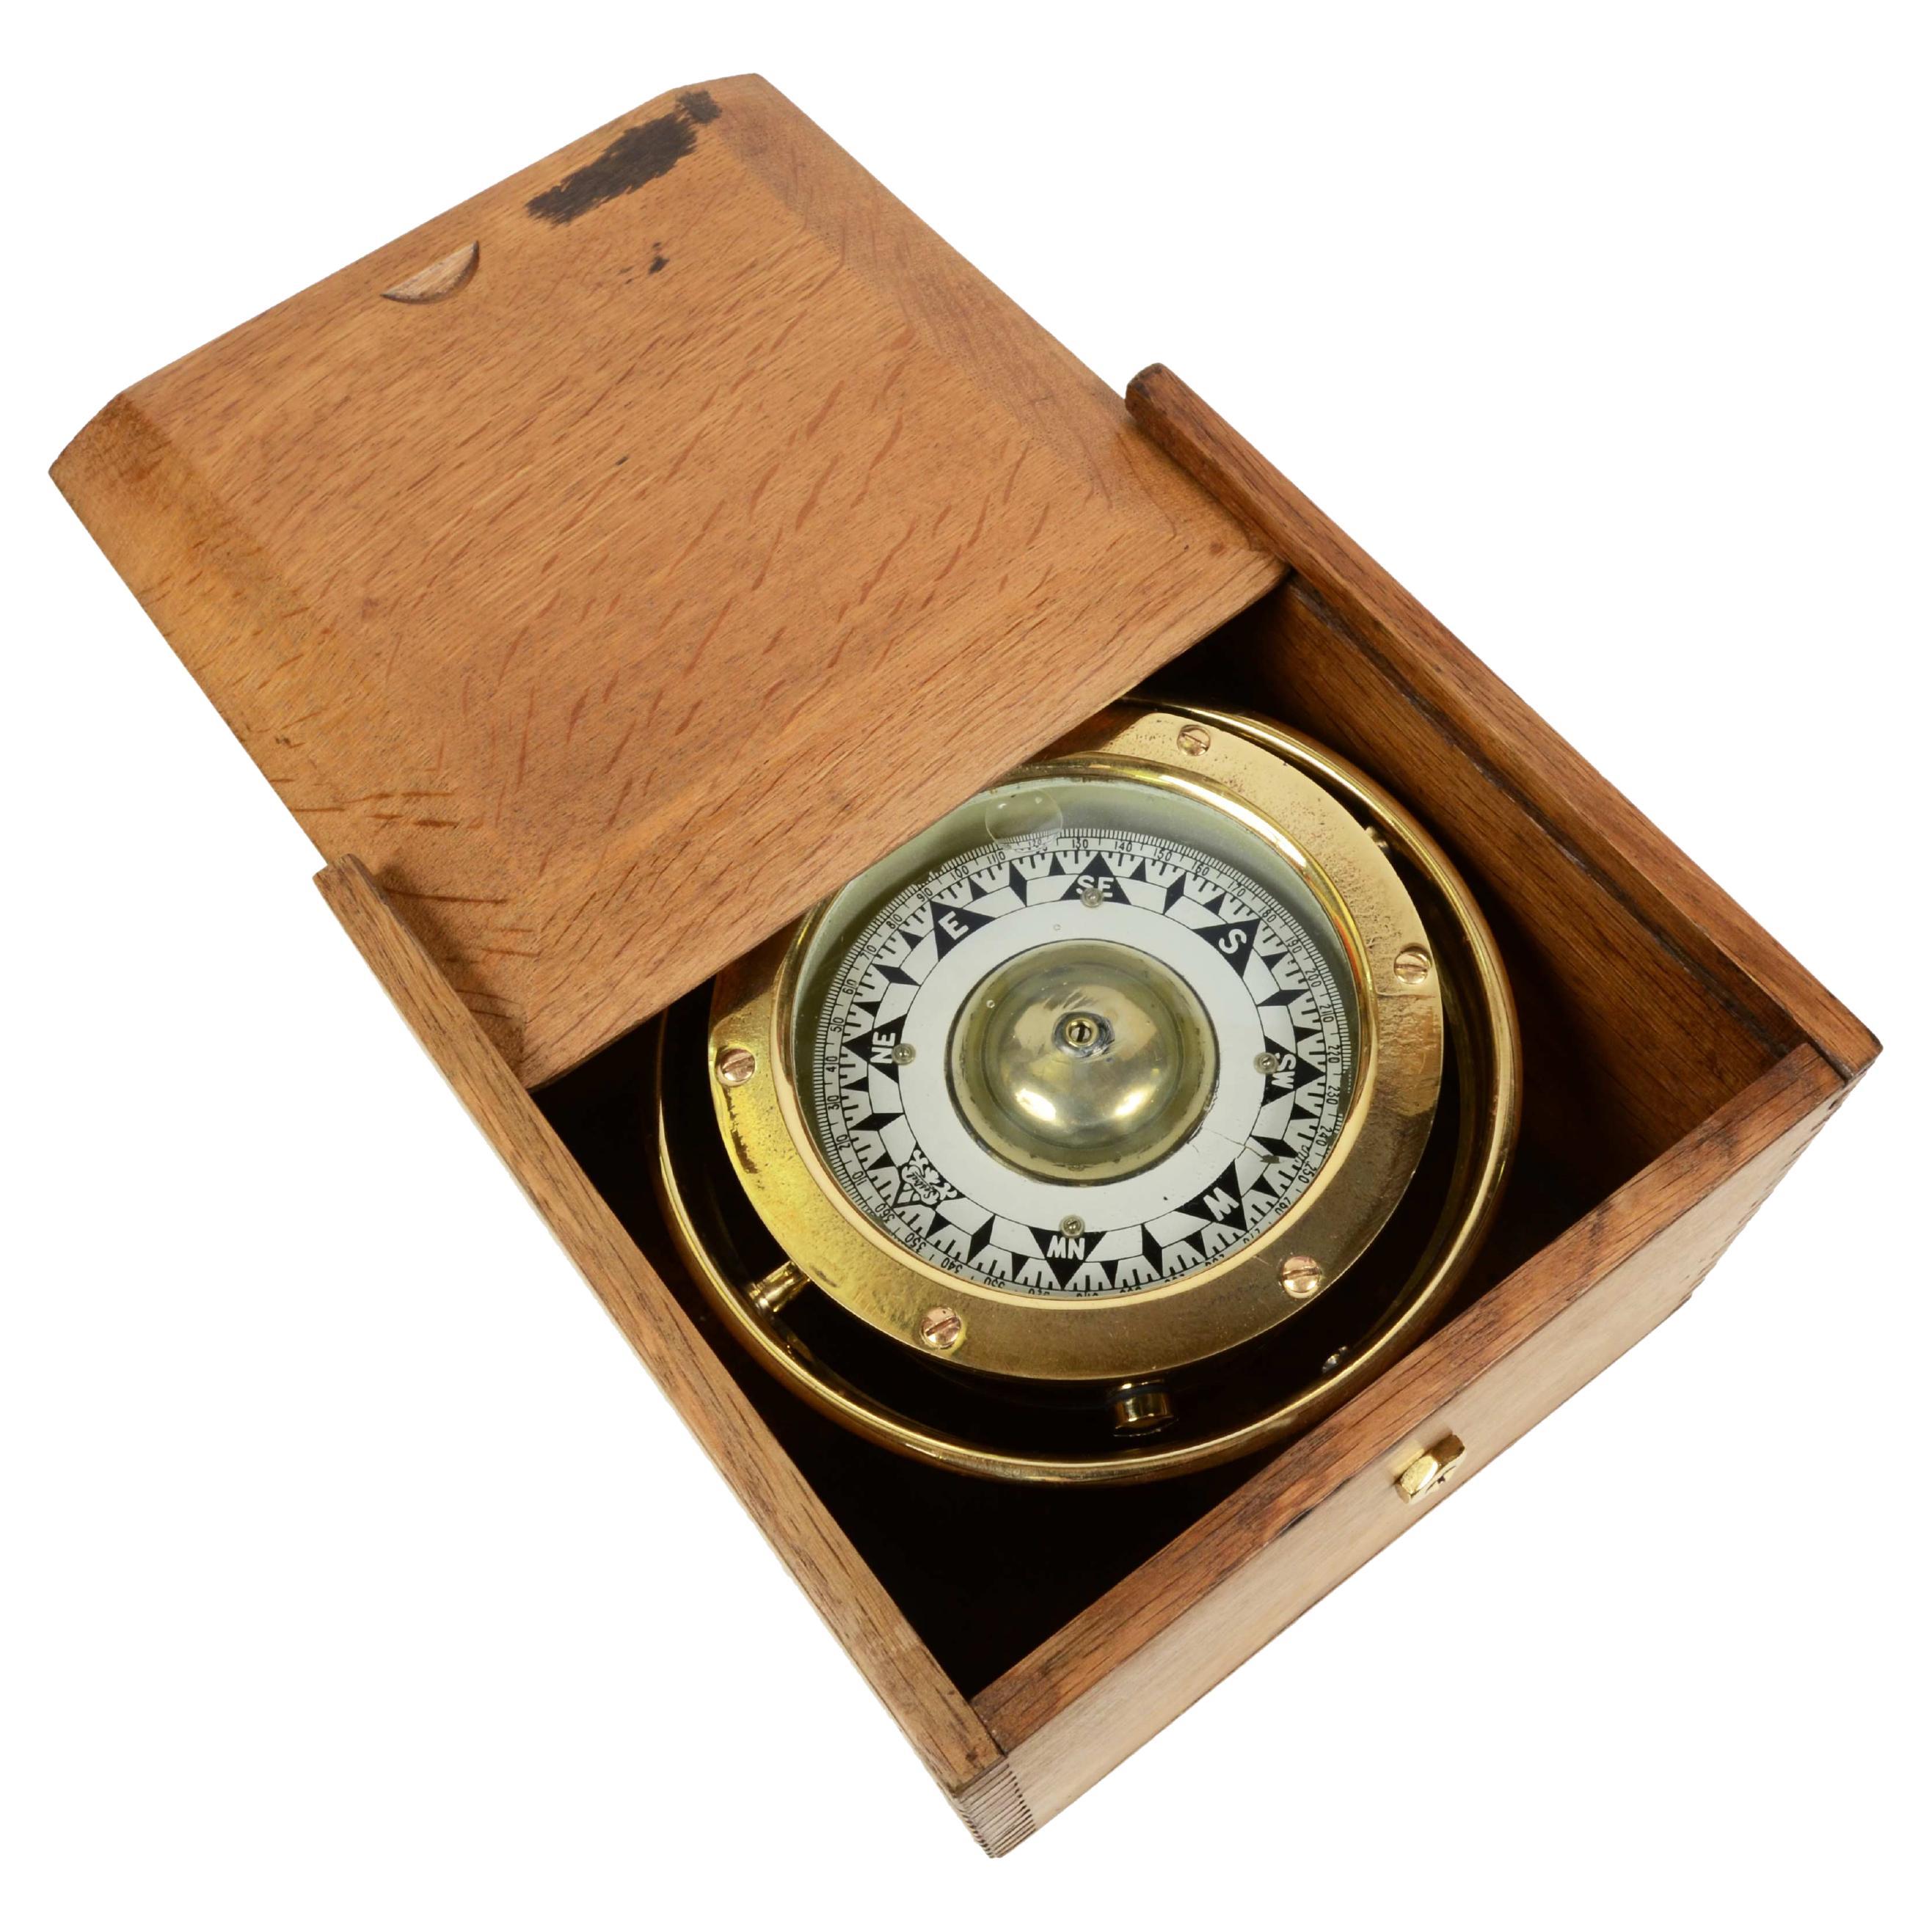 Liquid magnetic nautical compass on universal joint signed Sestrel from the 1900s, in its original oak wood box with lid. Eight wind rose complete with protractor circle.
The compass is made up of a cylindrical vessel in brass and bronze, called a